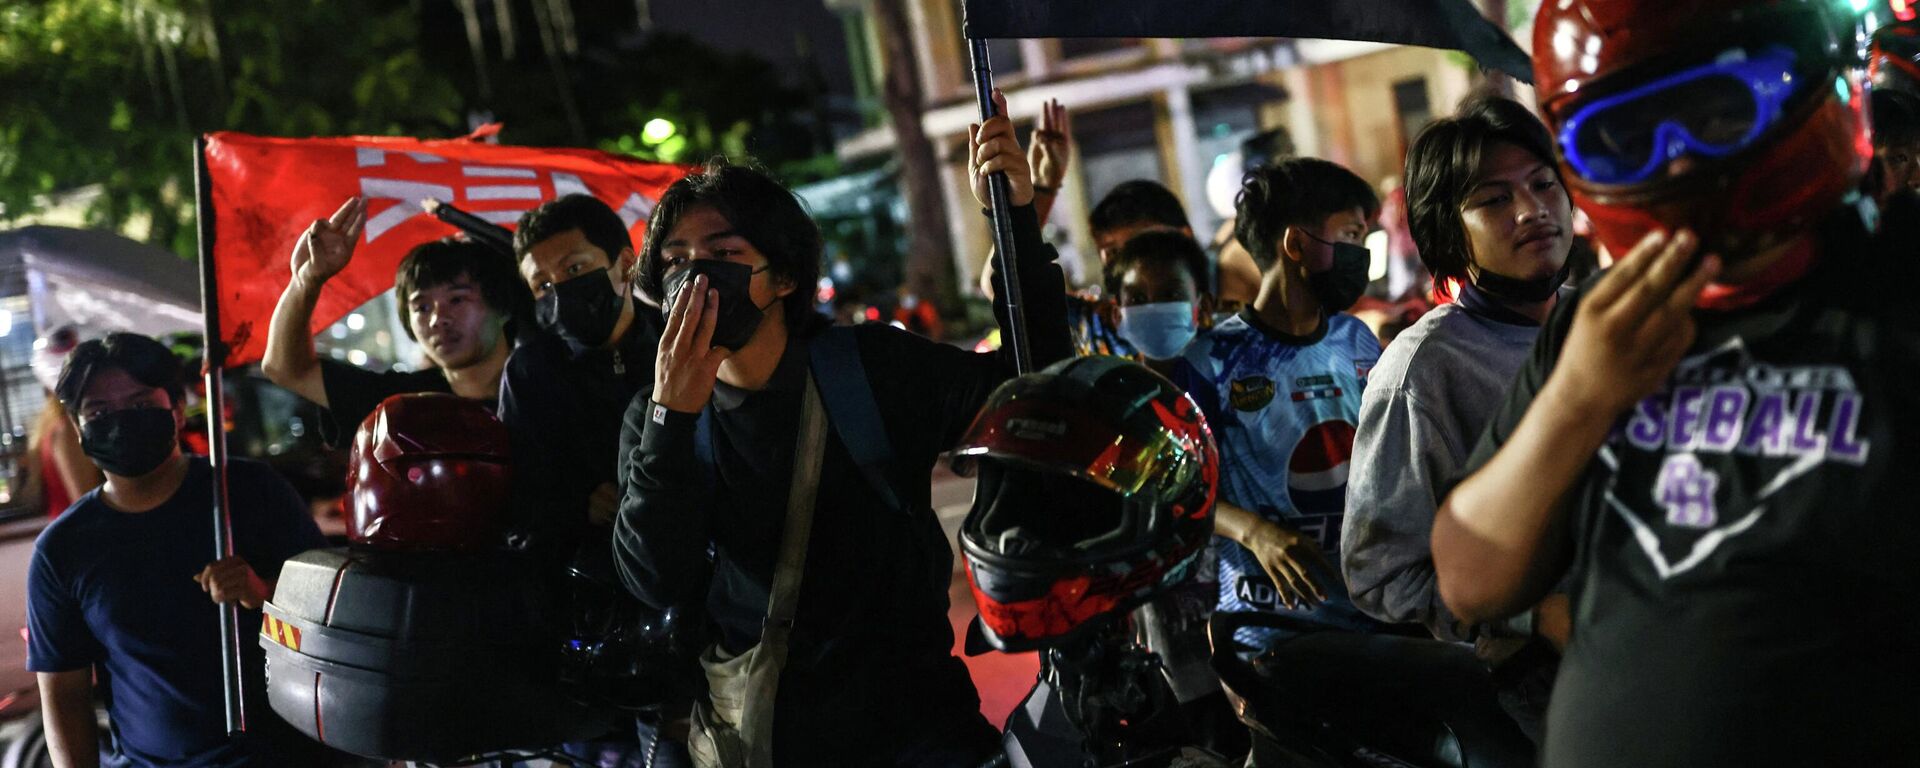 Protesters hold up the three-finger salute during a demonstration calling for the removal of Thailand's Prime Minister Prayut Chan-O-Cha at the Democracy Monument in Bangkok on August 23, 2022. - Sputnik International, 1920, 23.08.2022